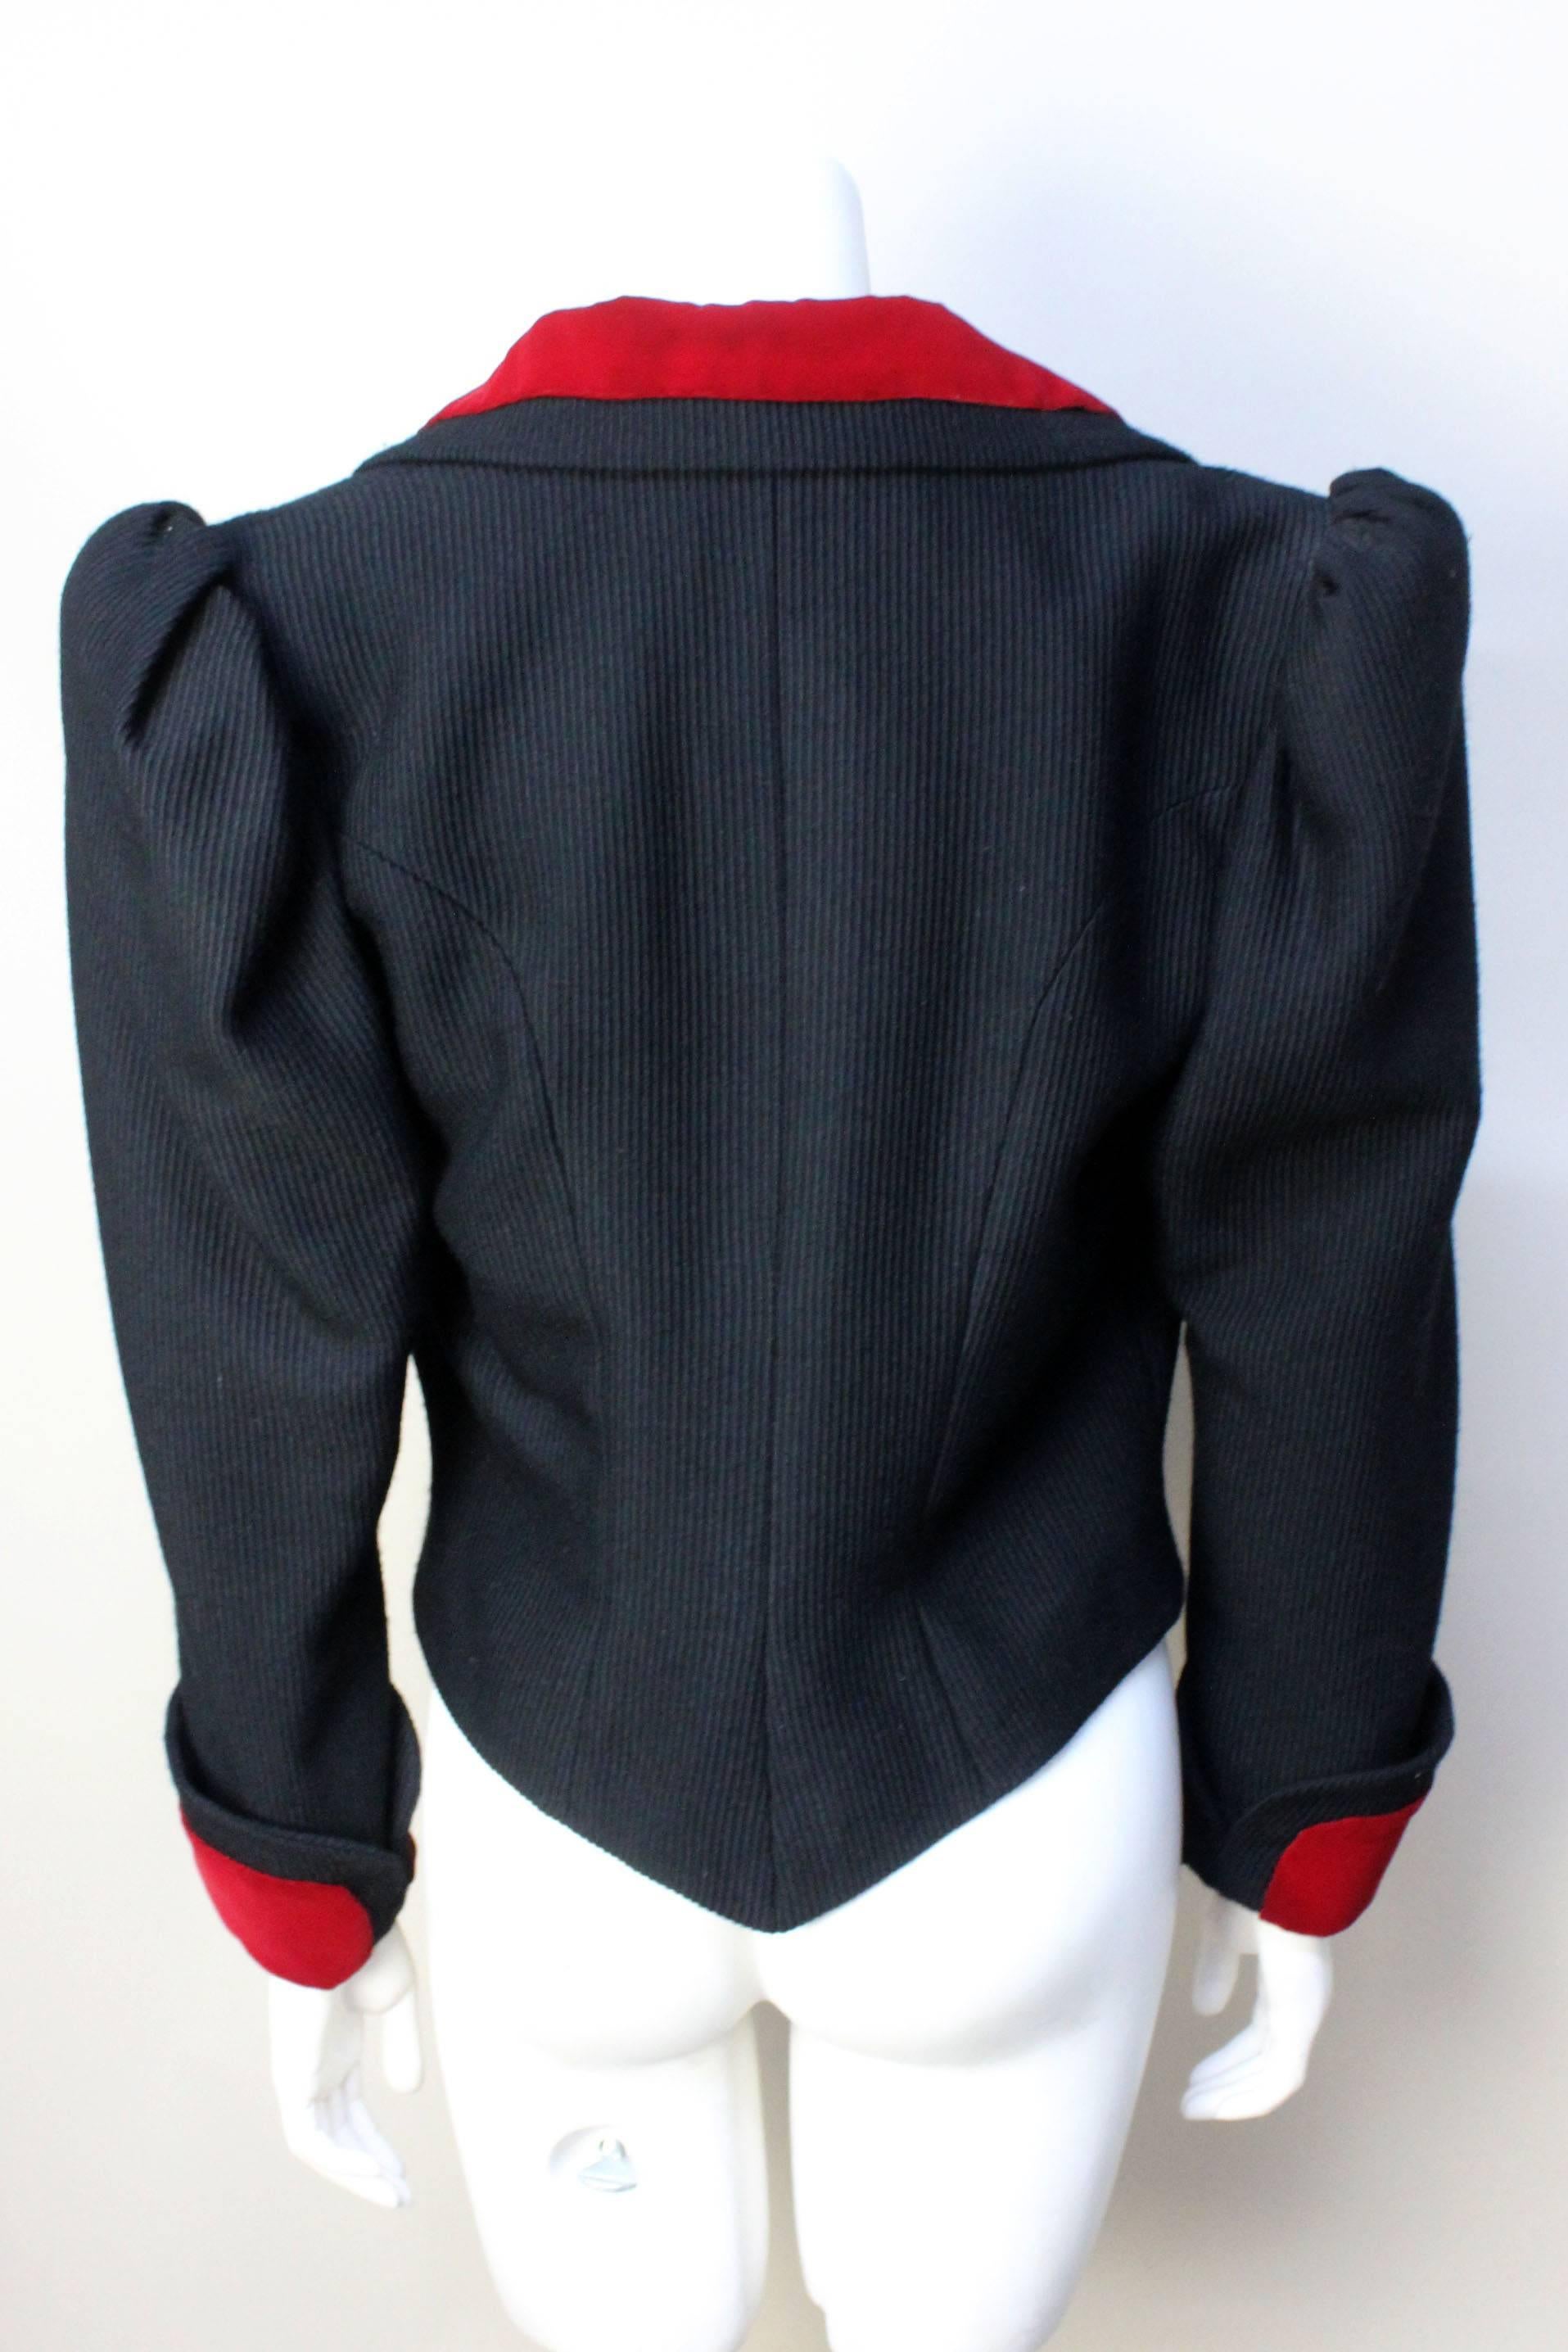 Diane Von Furstenburg Cropped Wool and Velvet Jacket In Excellent Condition For Sale In New York, NY